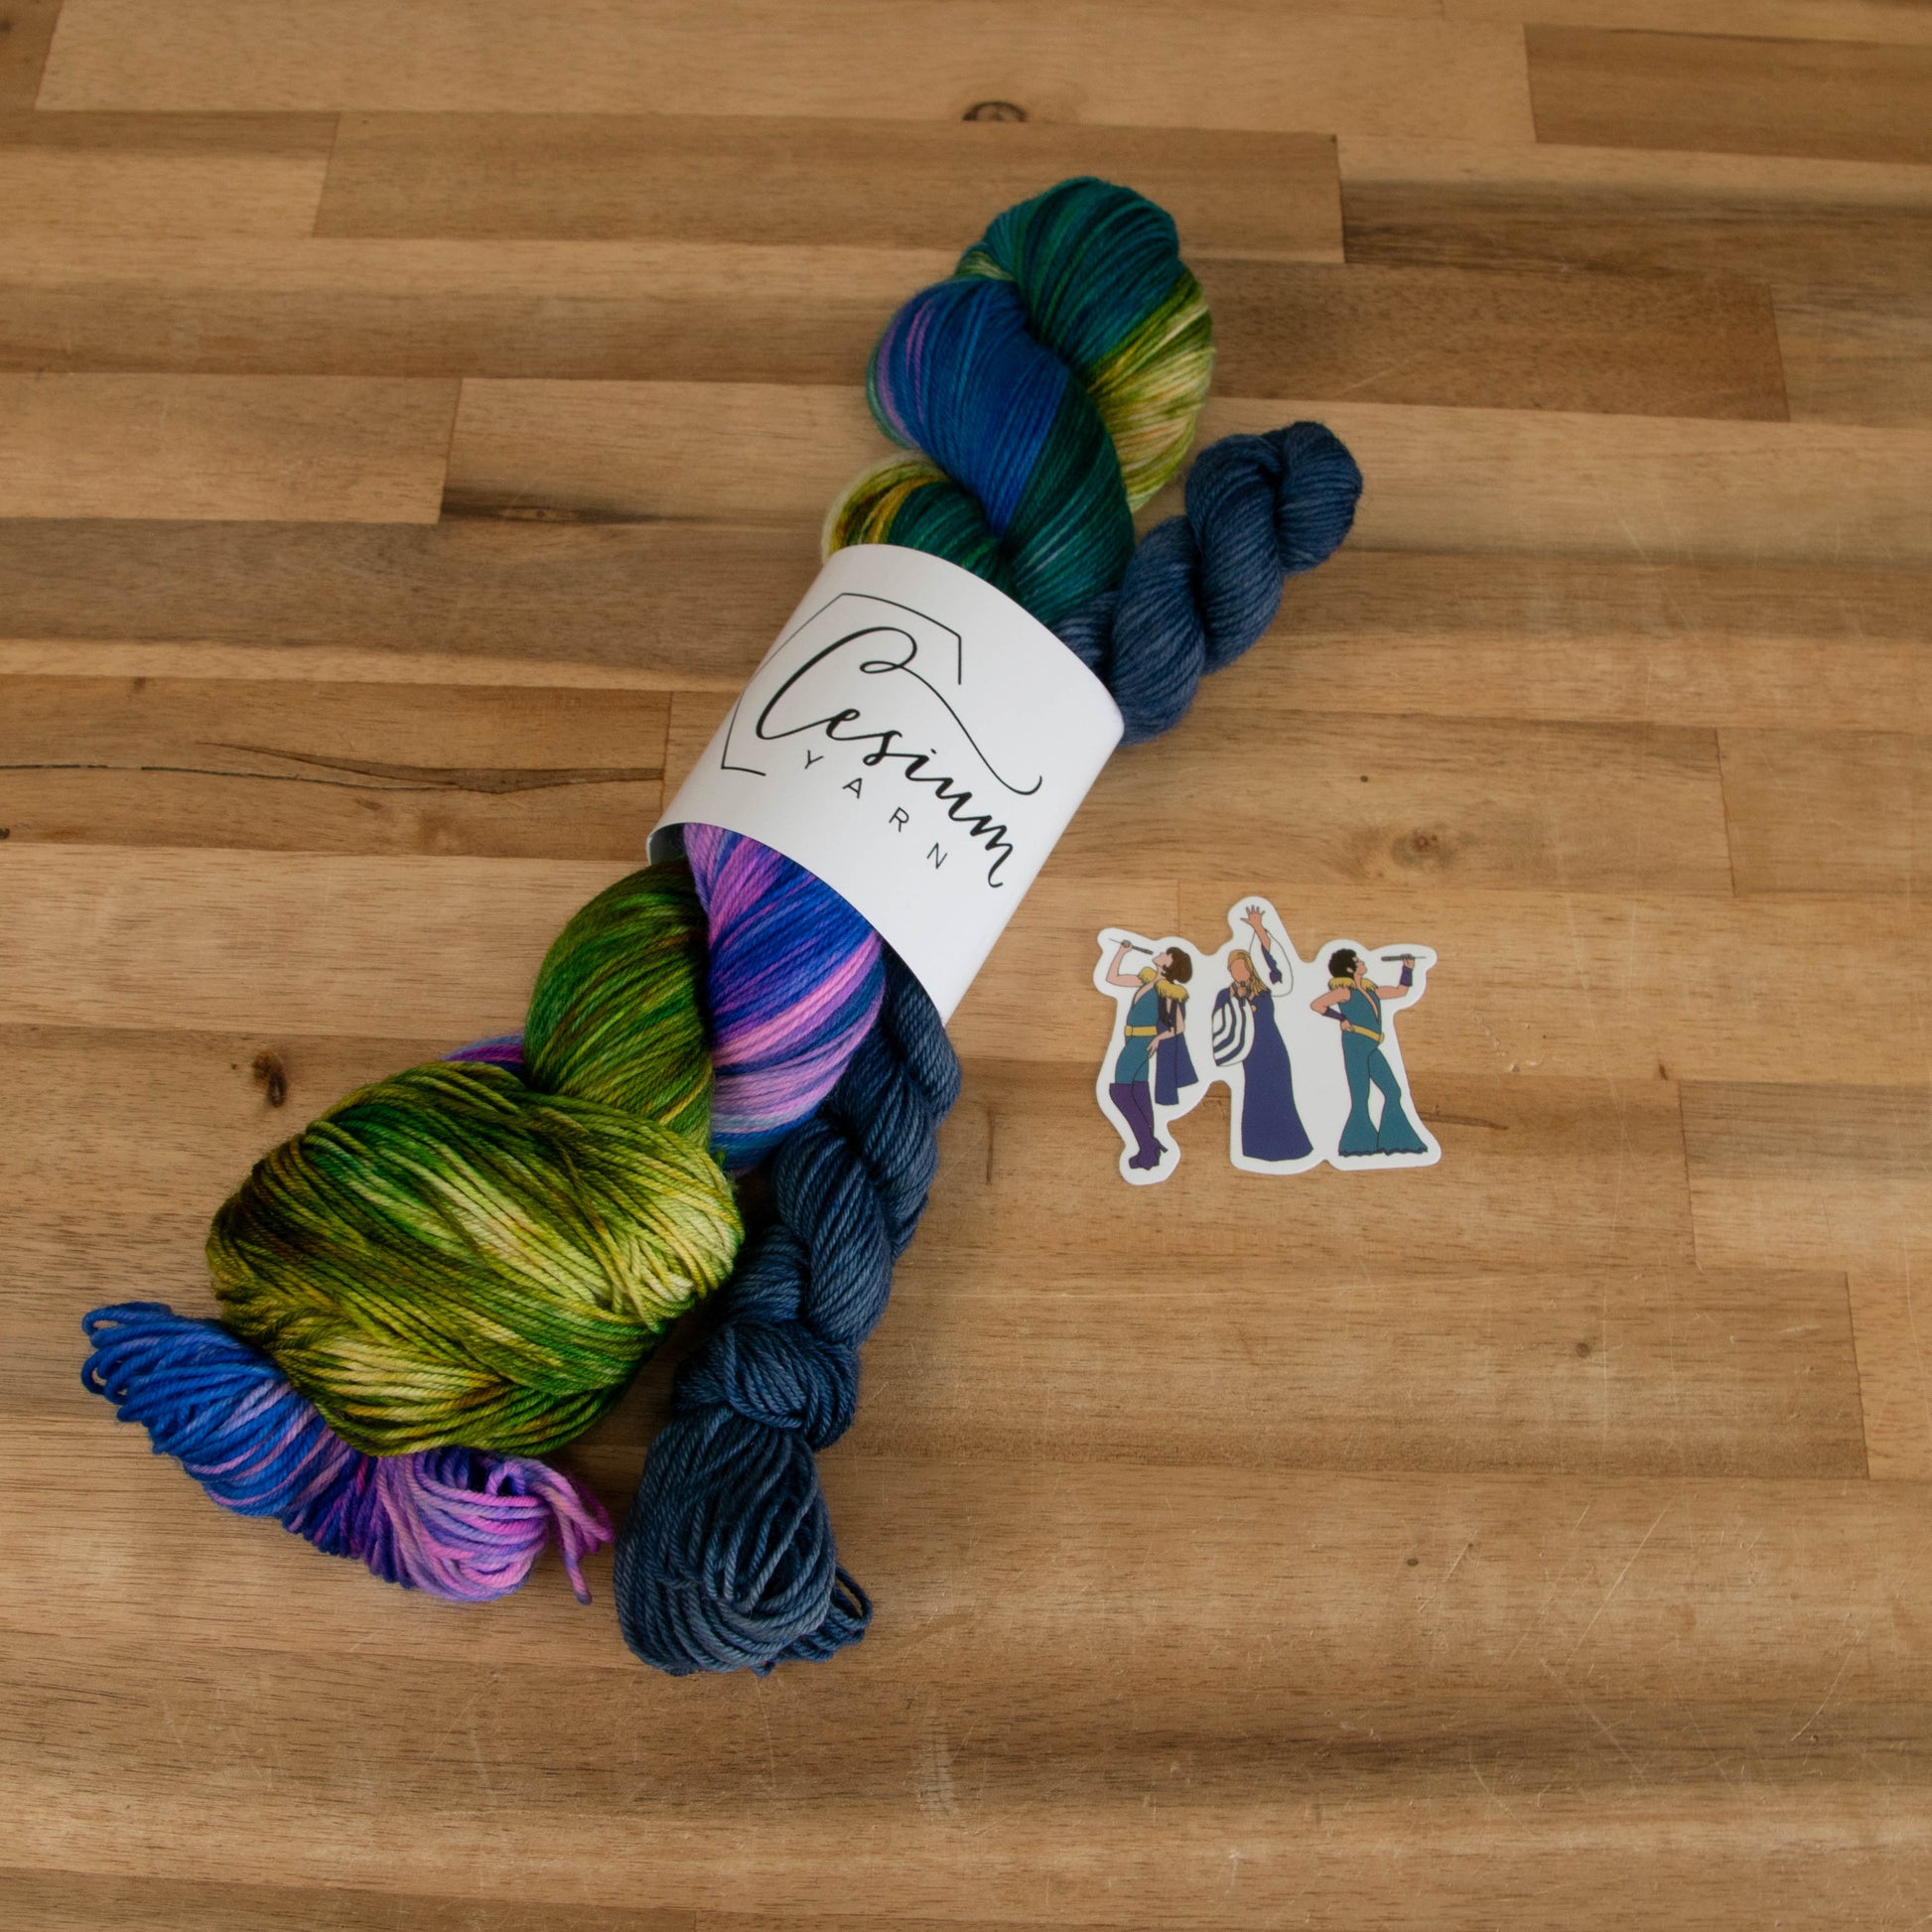 A skein of blue, green, and yellow yarn with pink accents next to a denim blue mini skein and a sticker of an illustration of Donna, Tanya, and Rosie.